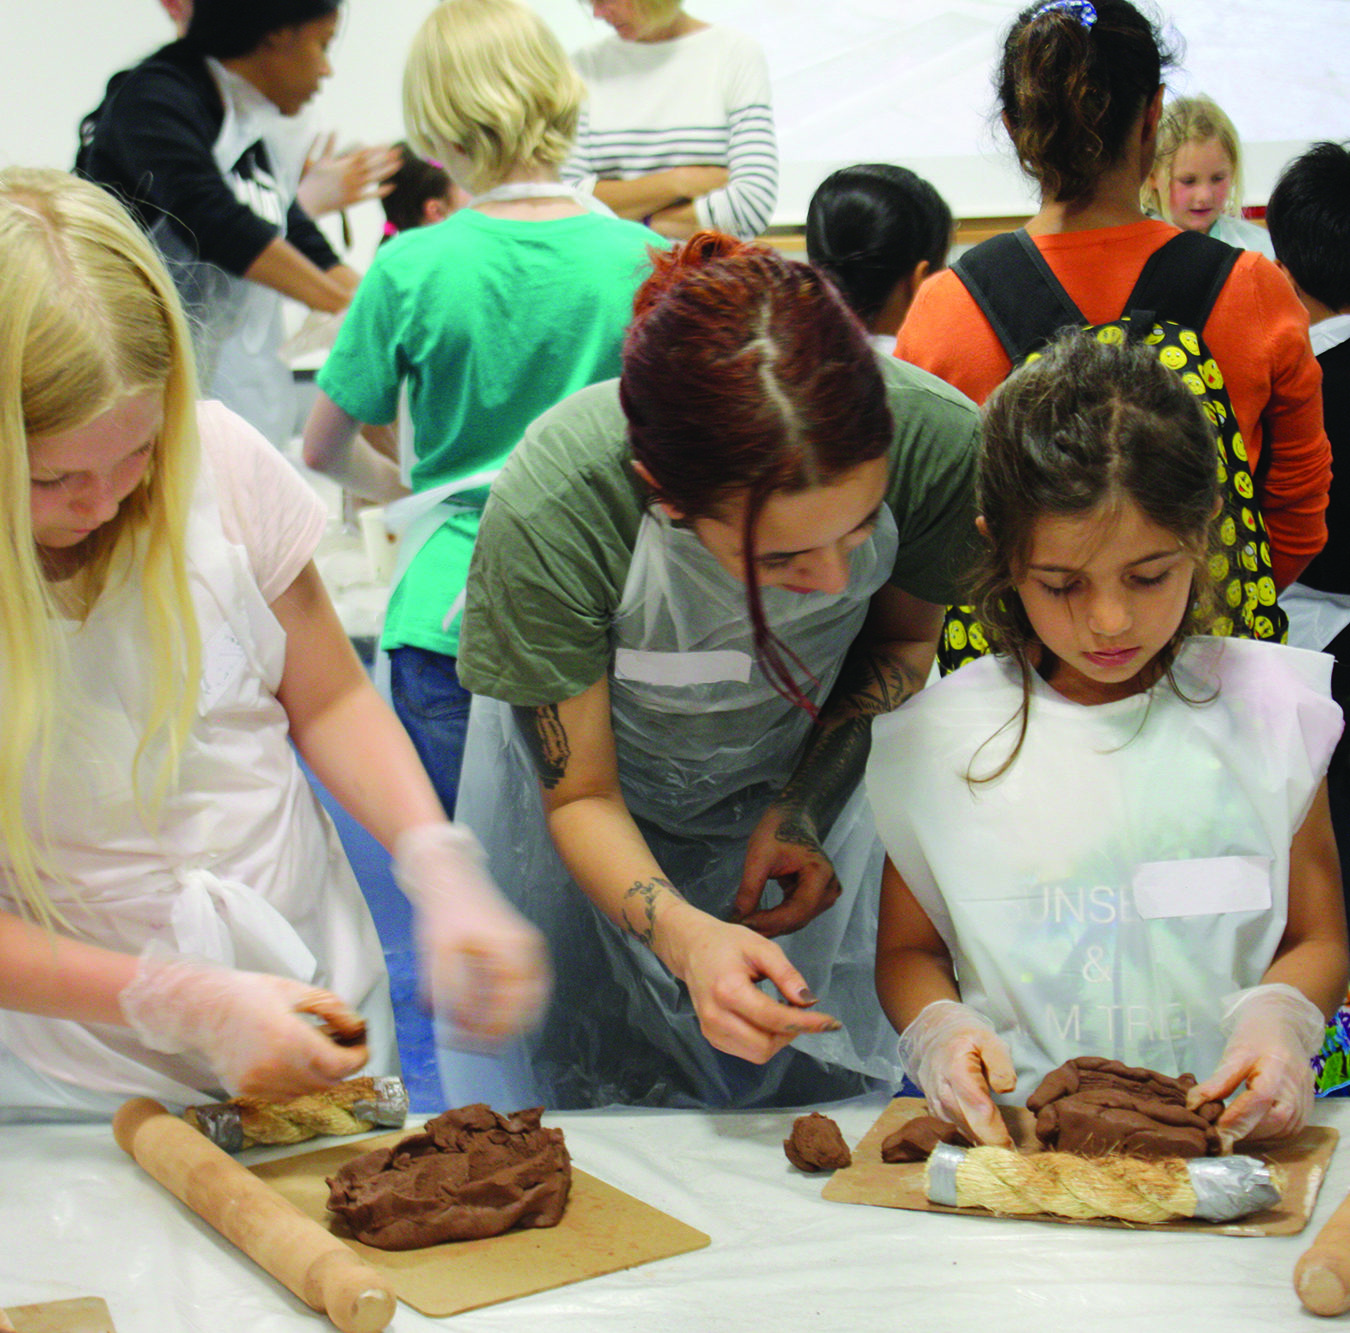 A woman is helping two girls to work with clay. All are wearing plastic aprons. In the background more people seem to be engaged in the same activity.